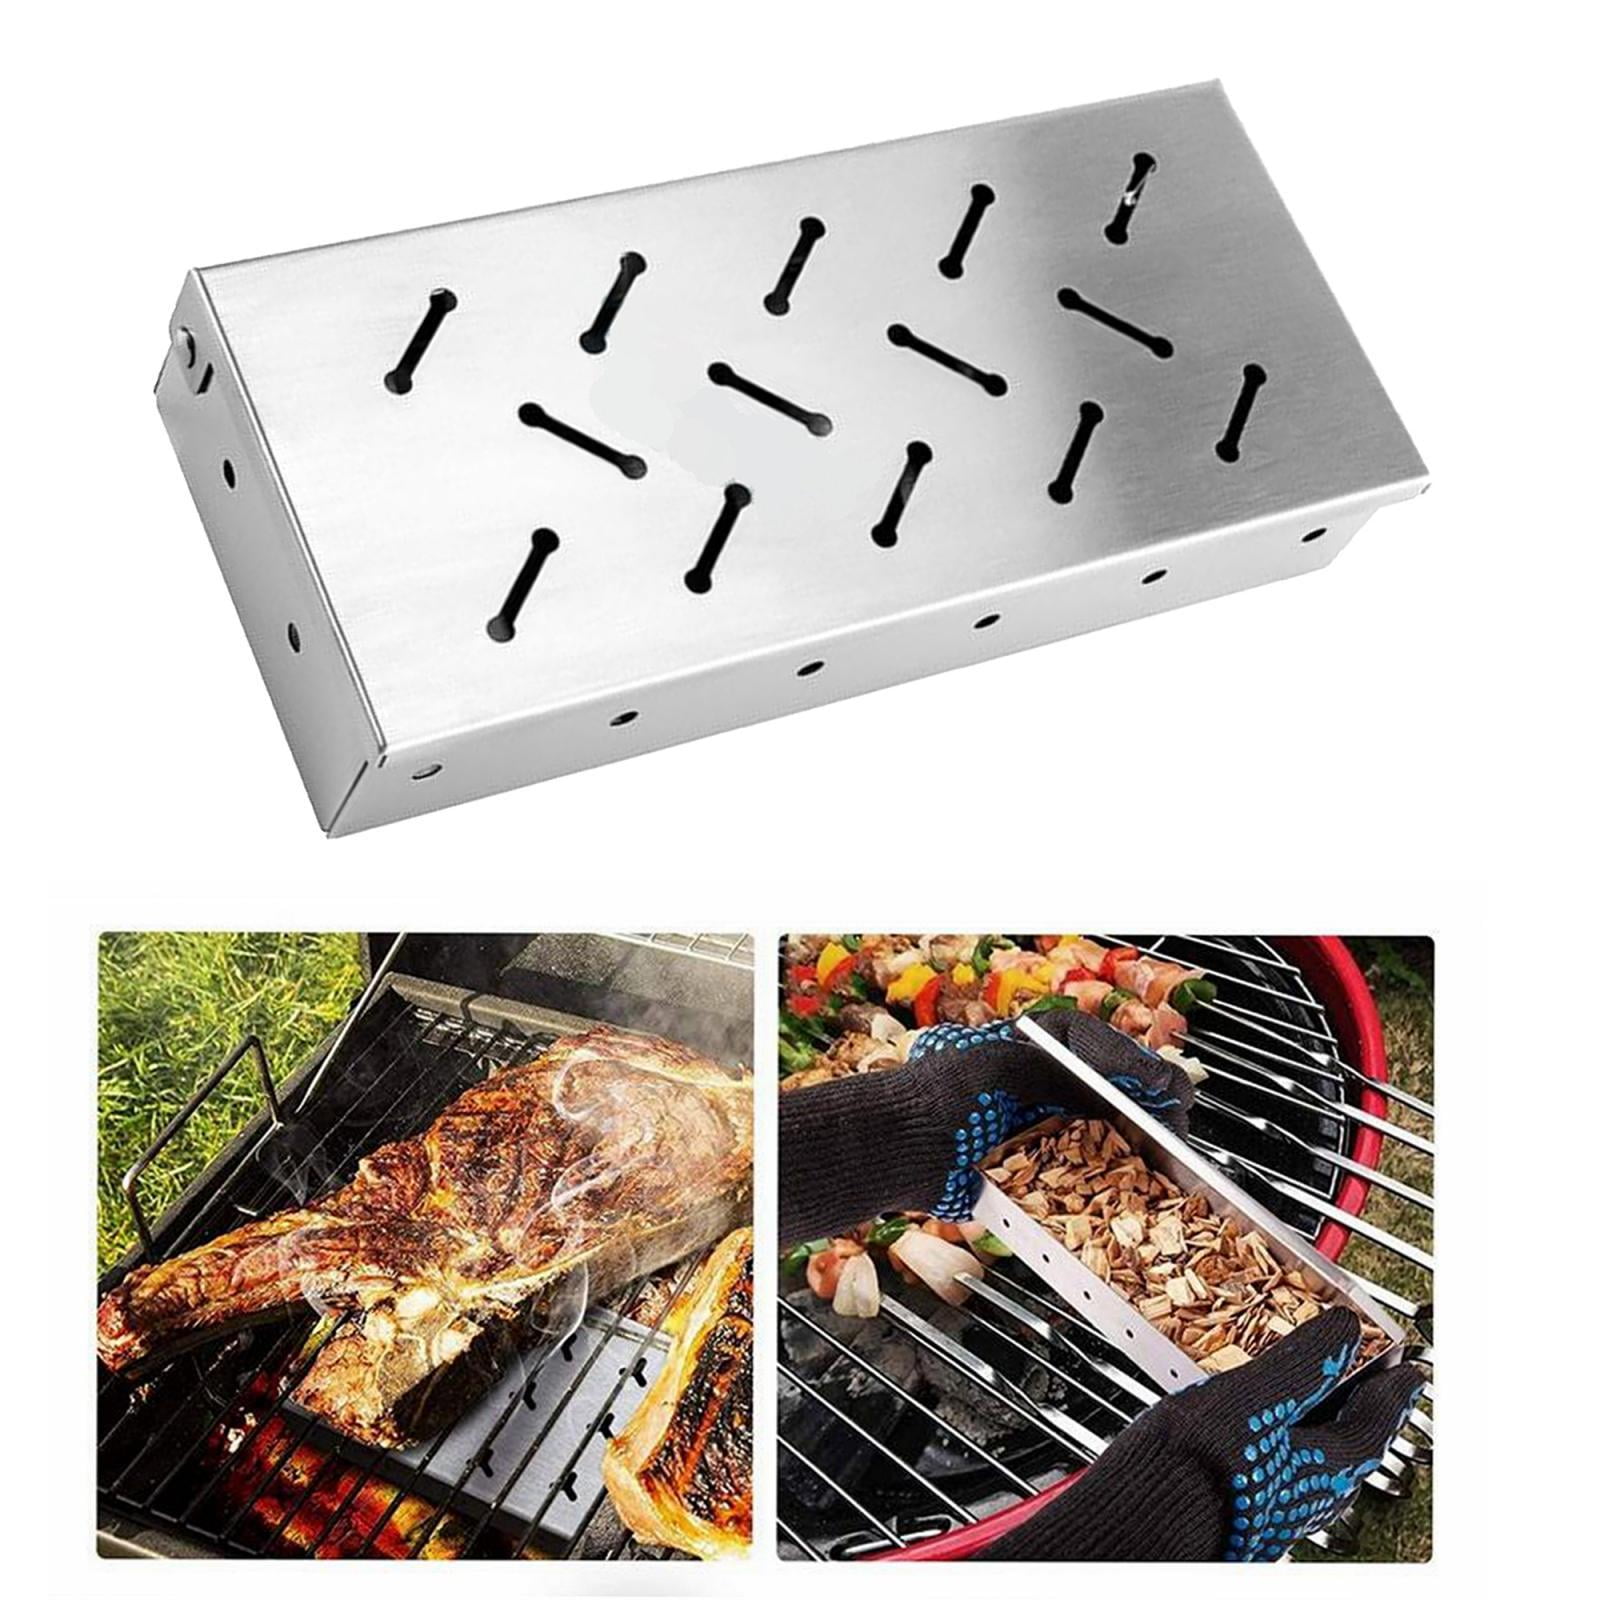 Box For Gas Grill for Wood Chips, Stainless Steel Bucket Style with ...